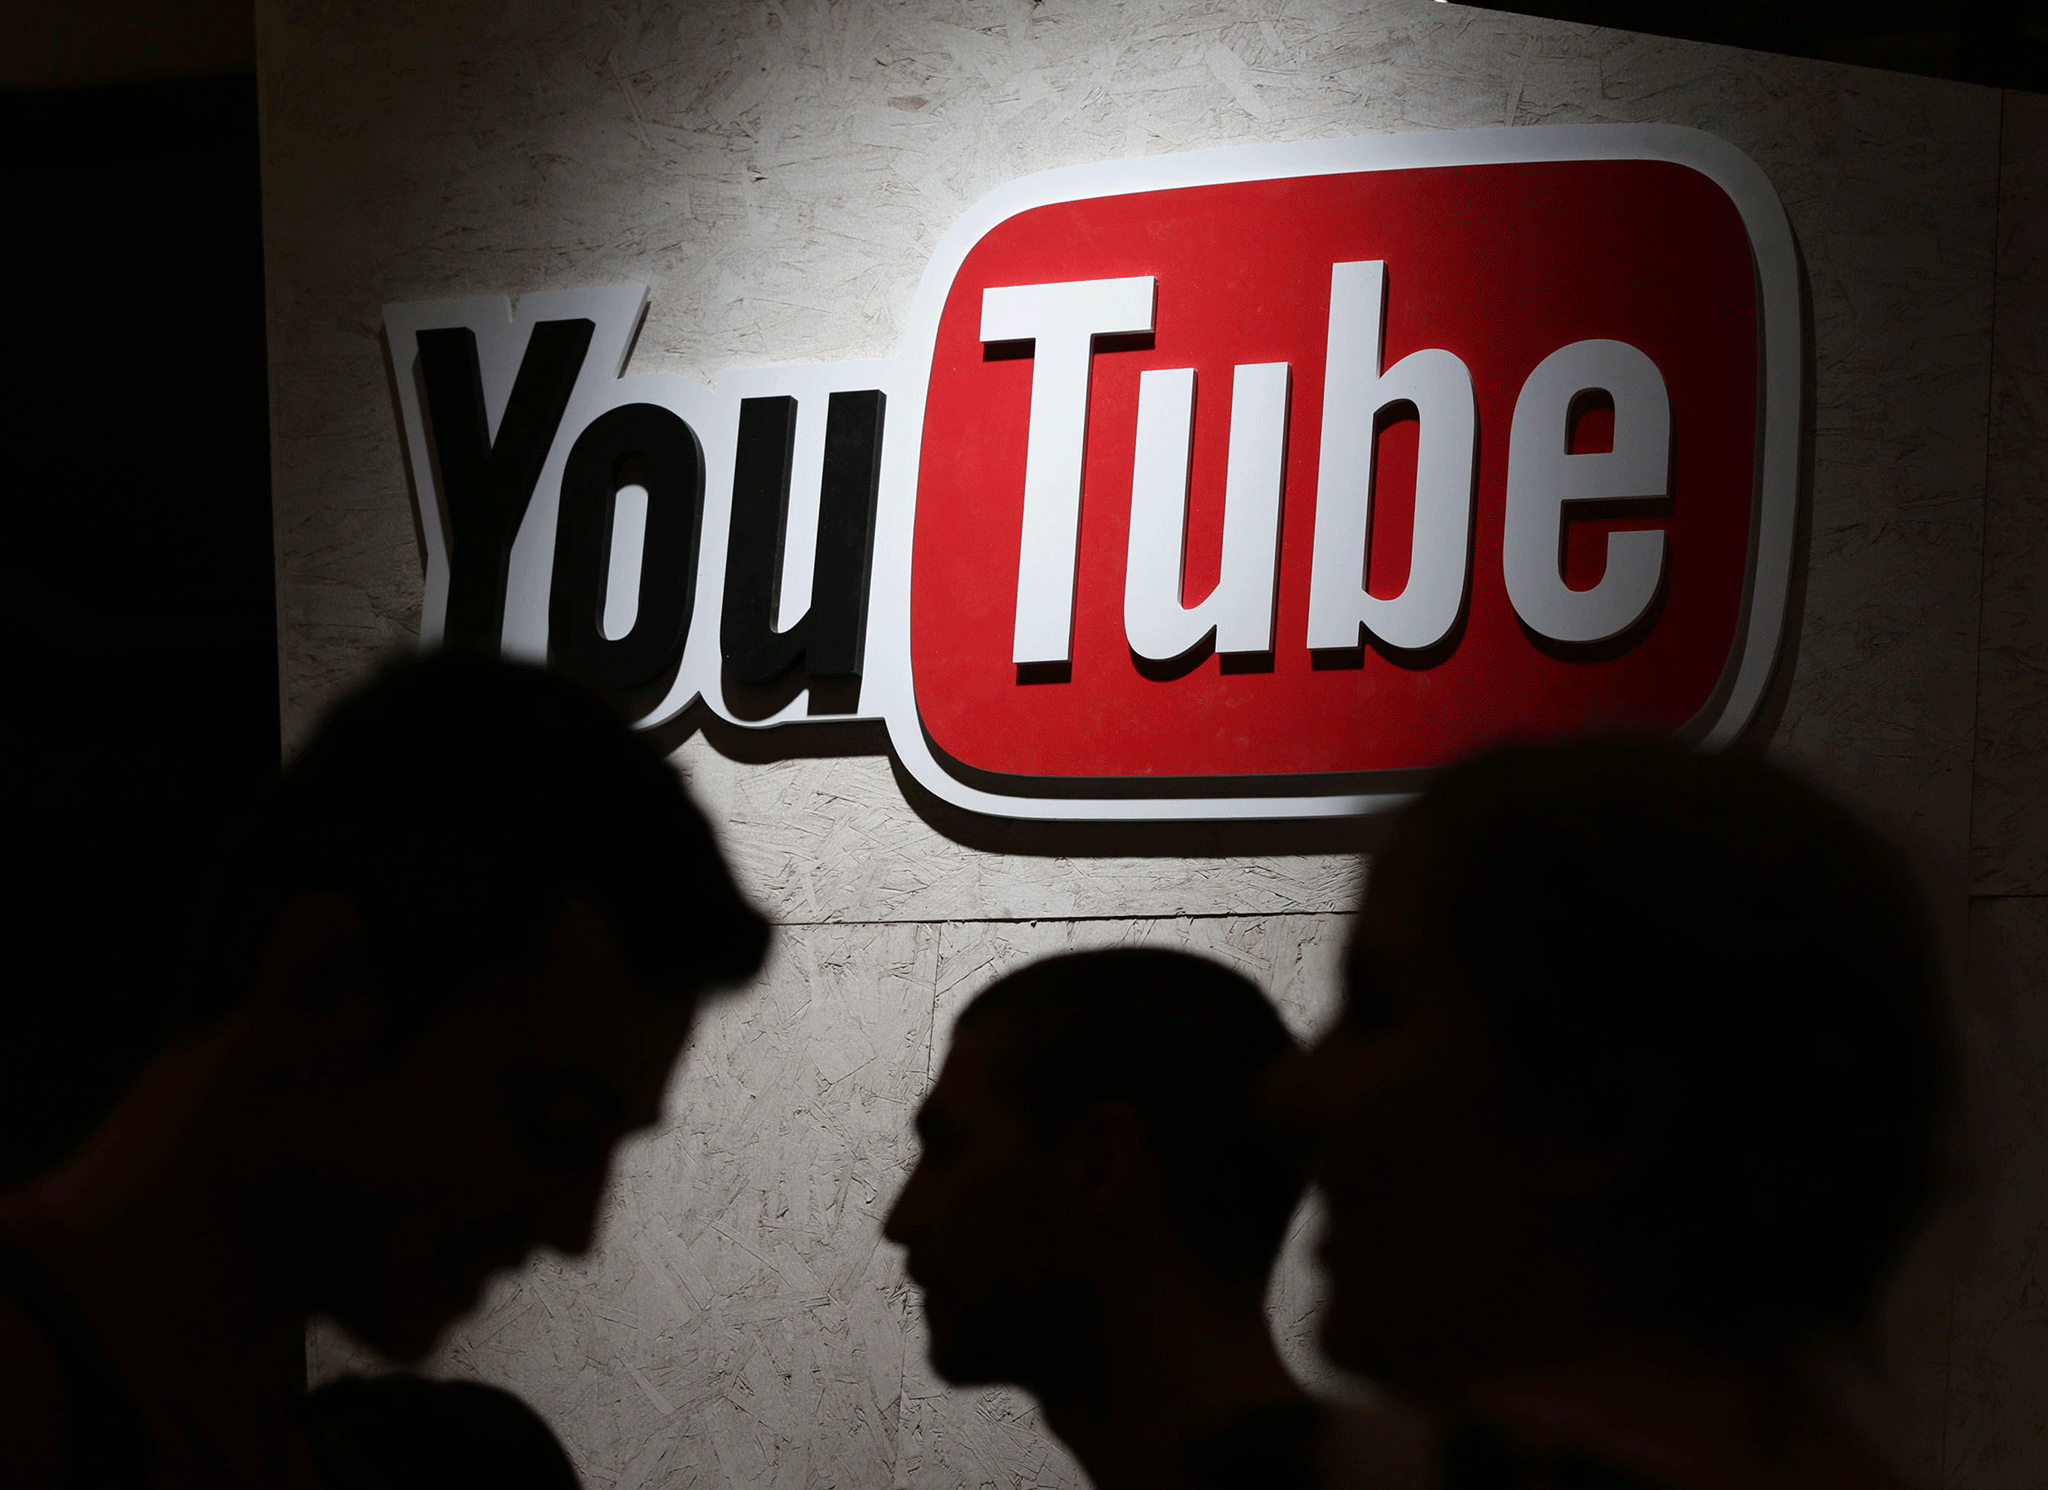 YouTube-MP3.org lets you convert YouTube videos to downloadable mp3 audio files